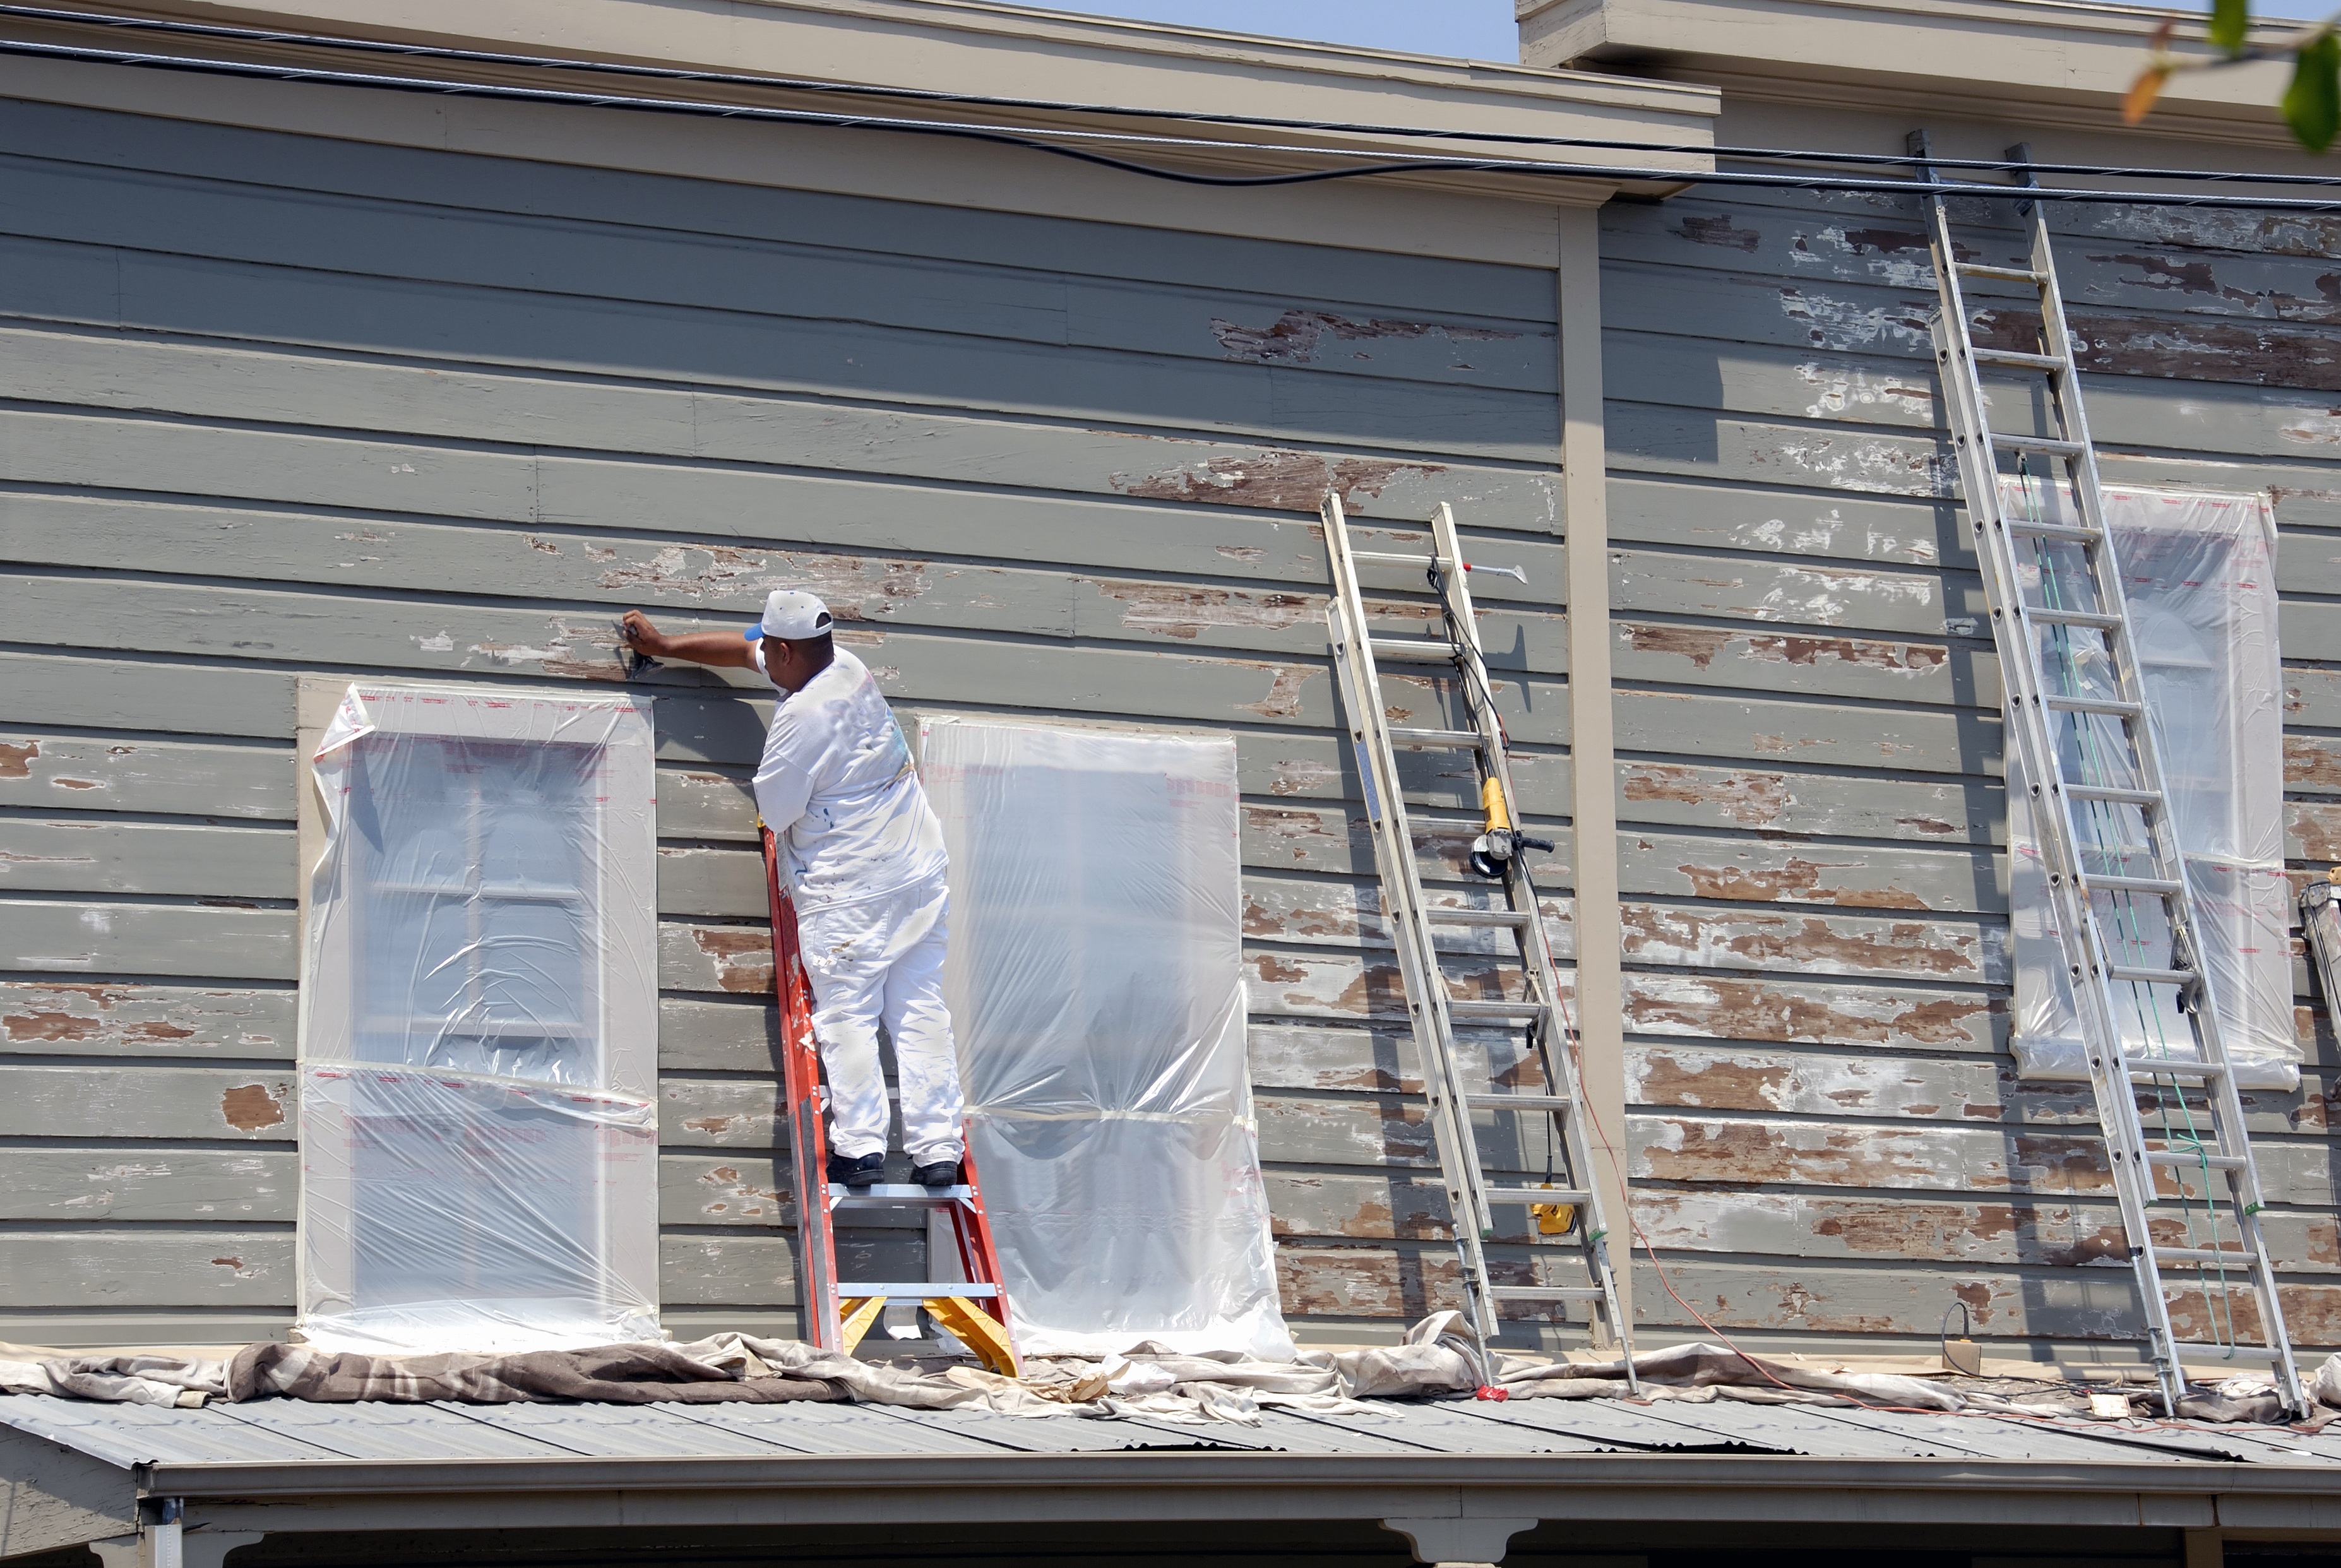 Painter scraping paint from house